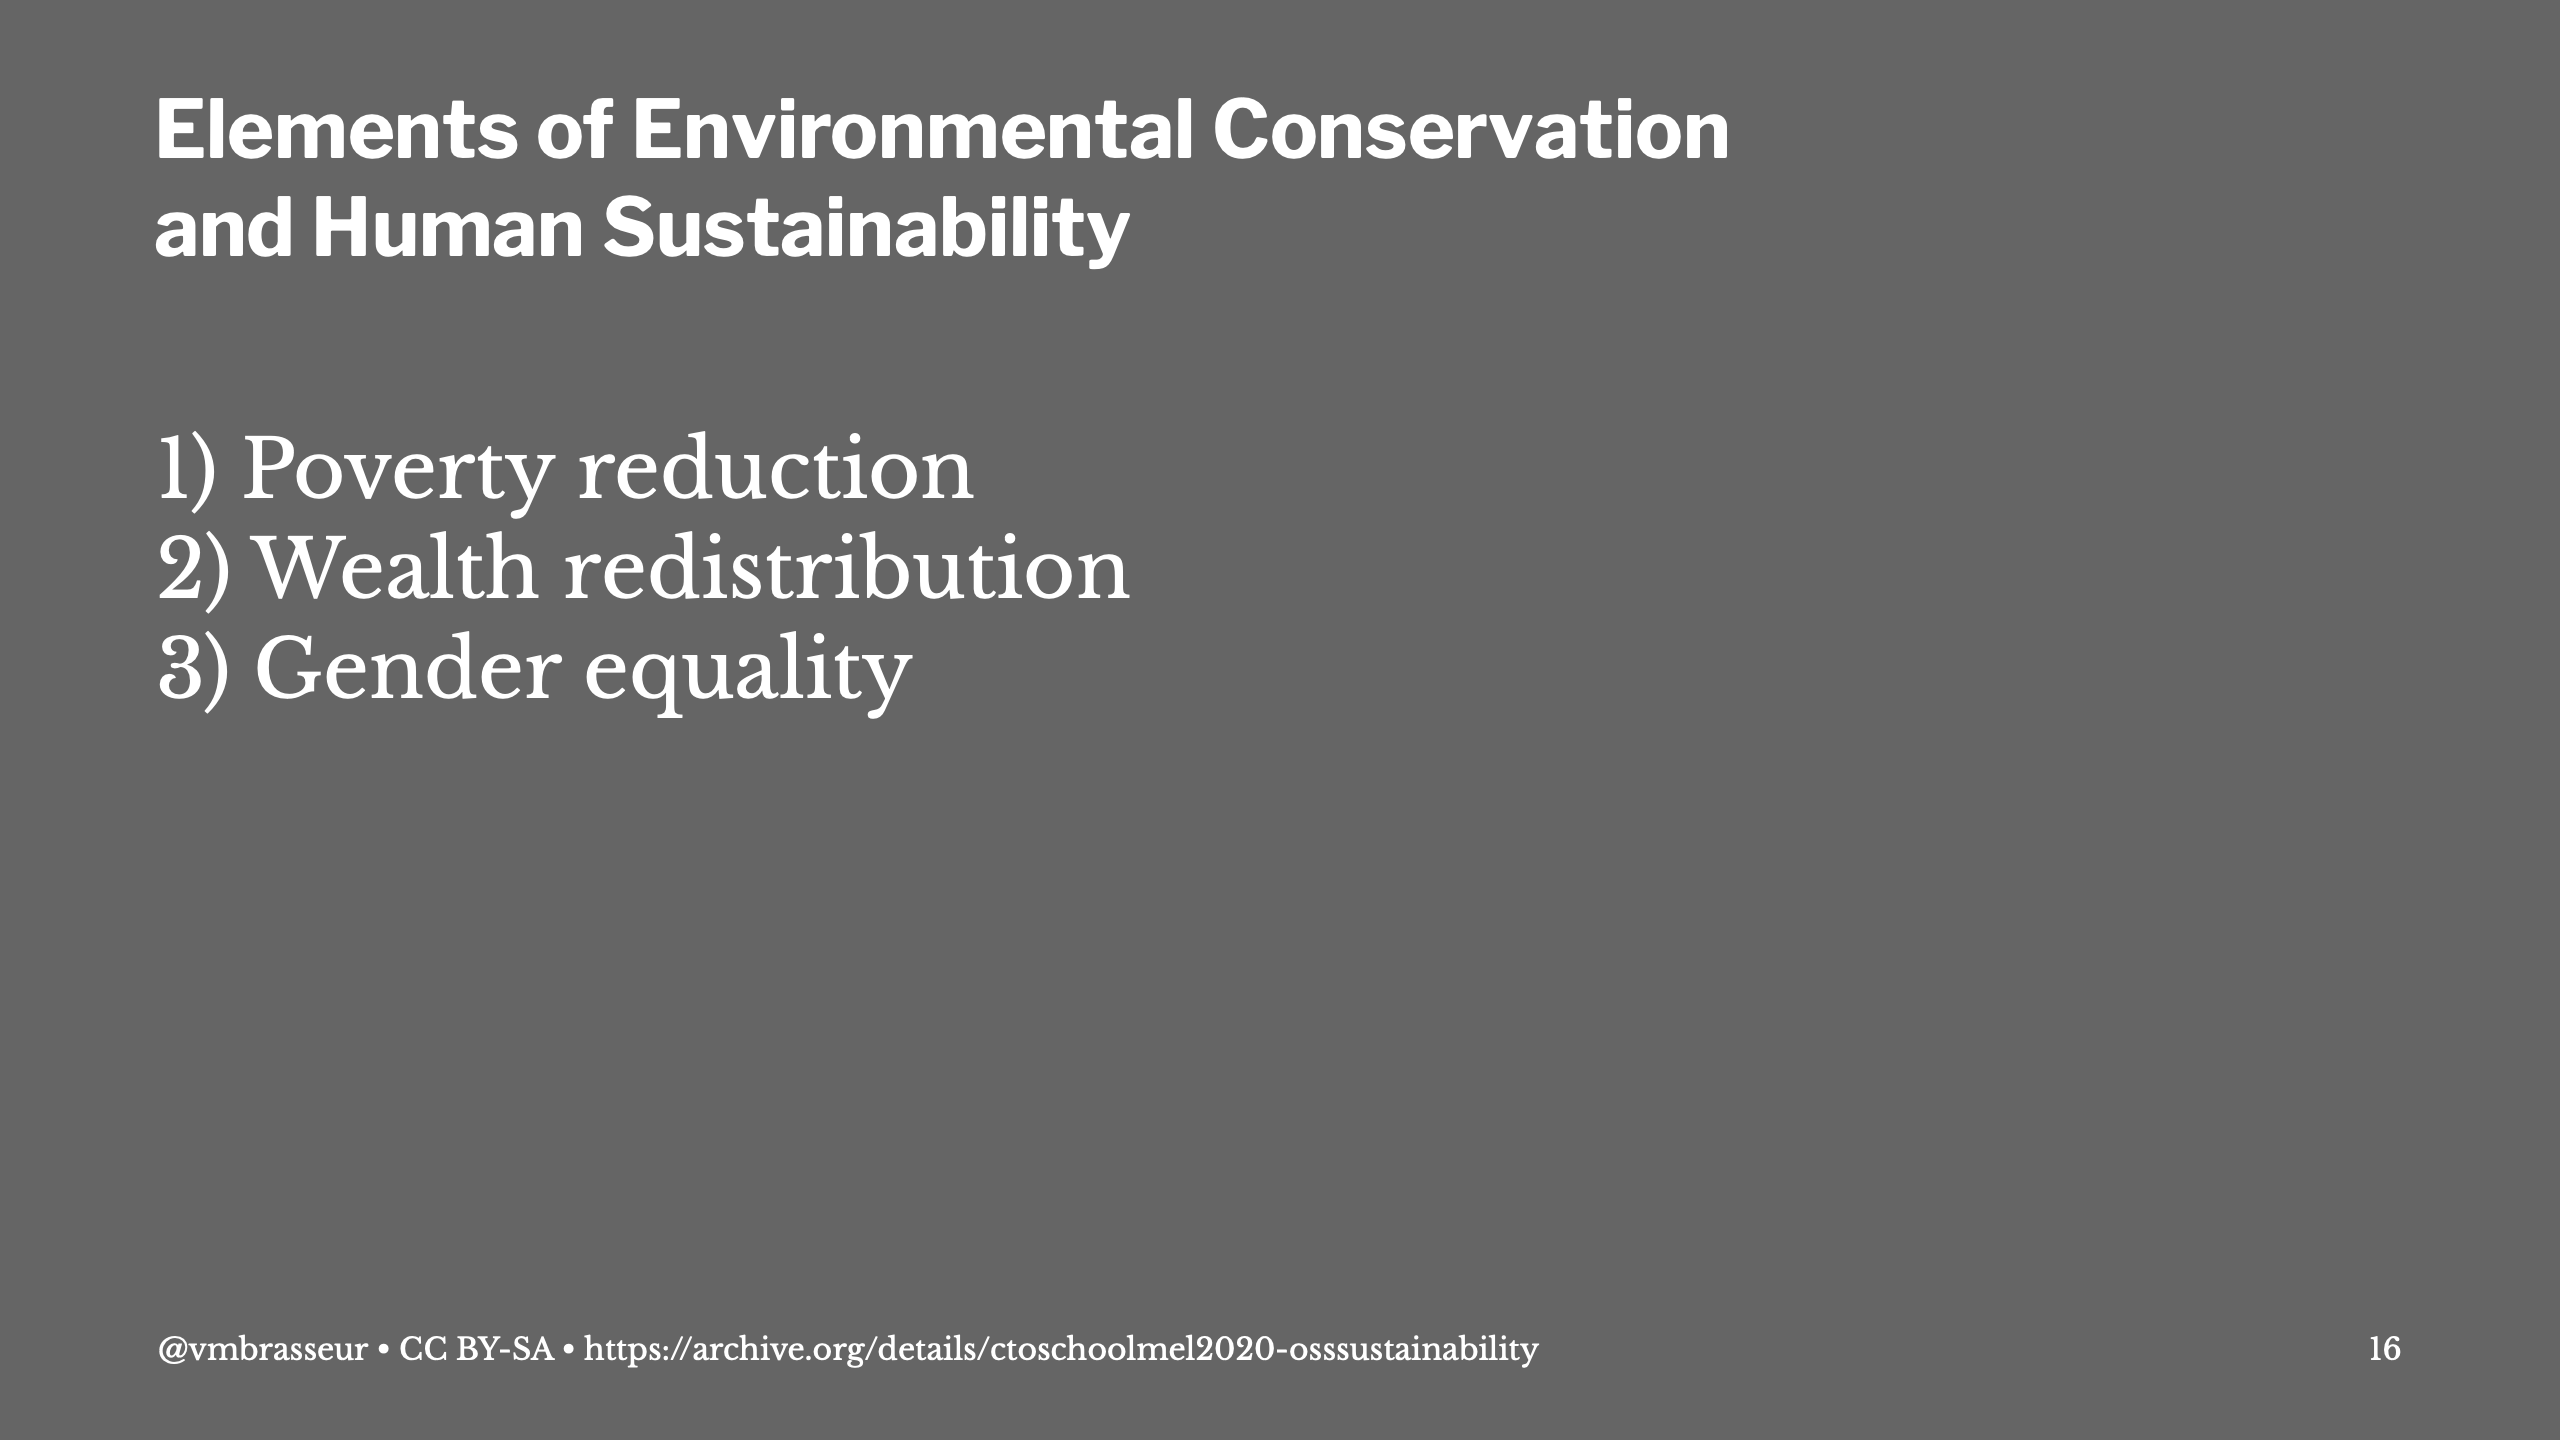 Elements of Environmental Conservation and Human Sustainability: Poverty reduction, Wealth redistribution, and Gender equality